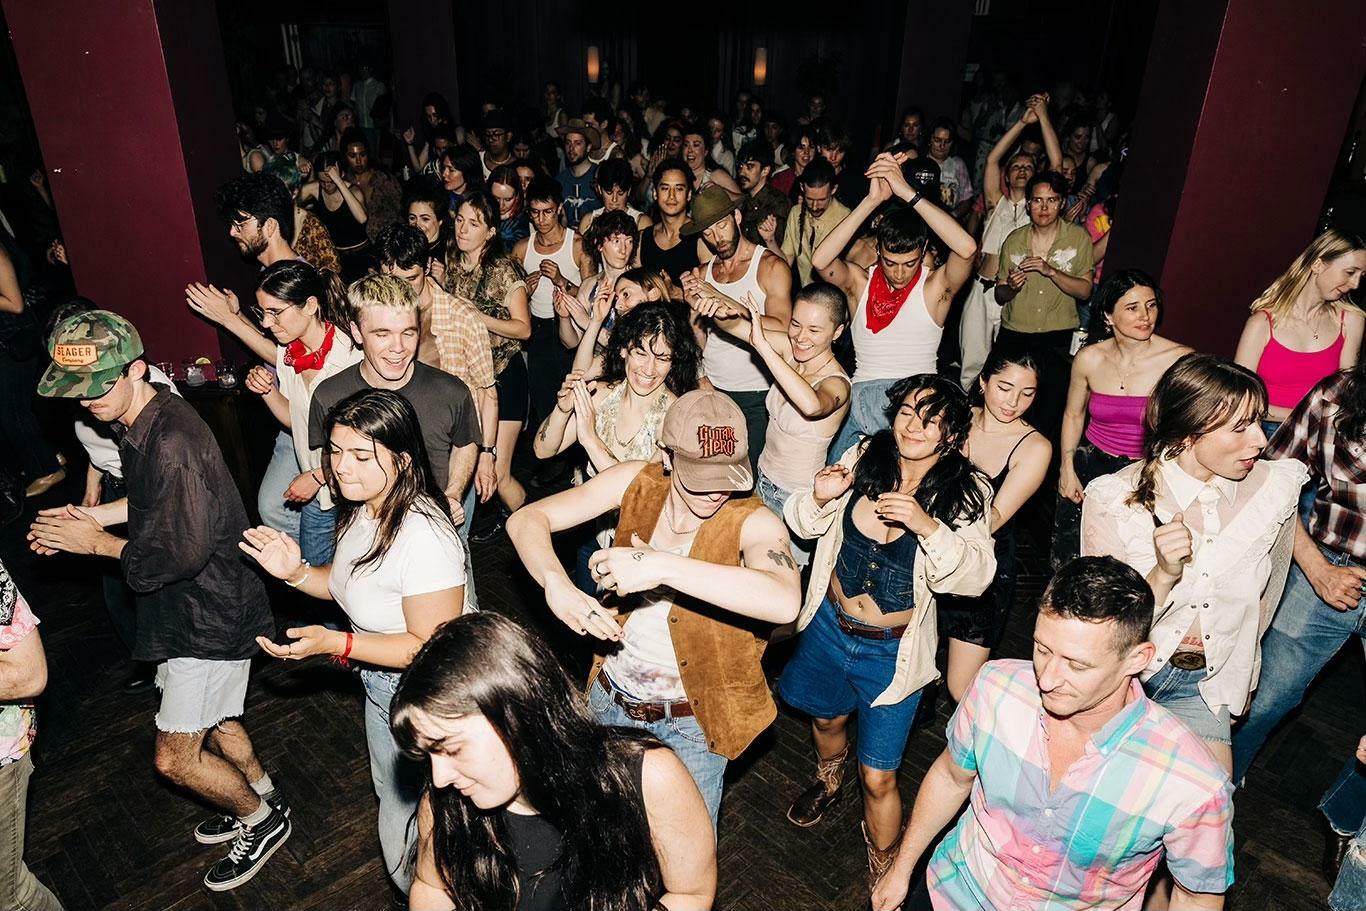 Stud Country is bringing queer line-dancing and two-step lessons to Brooklyn